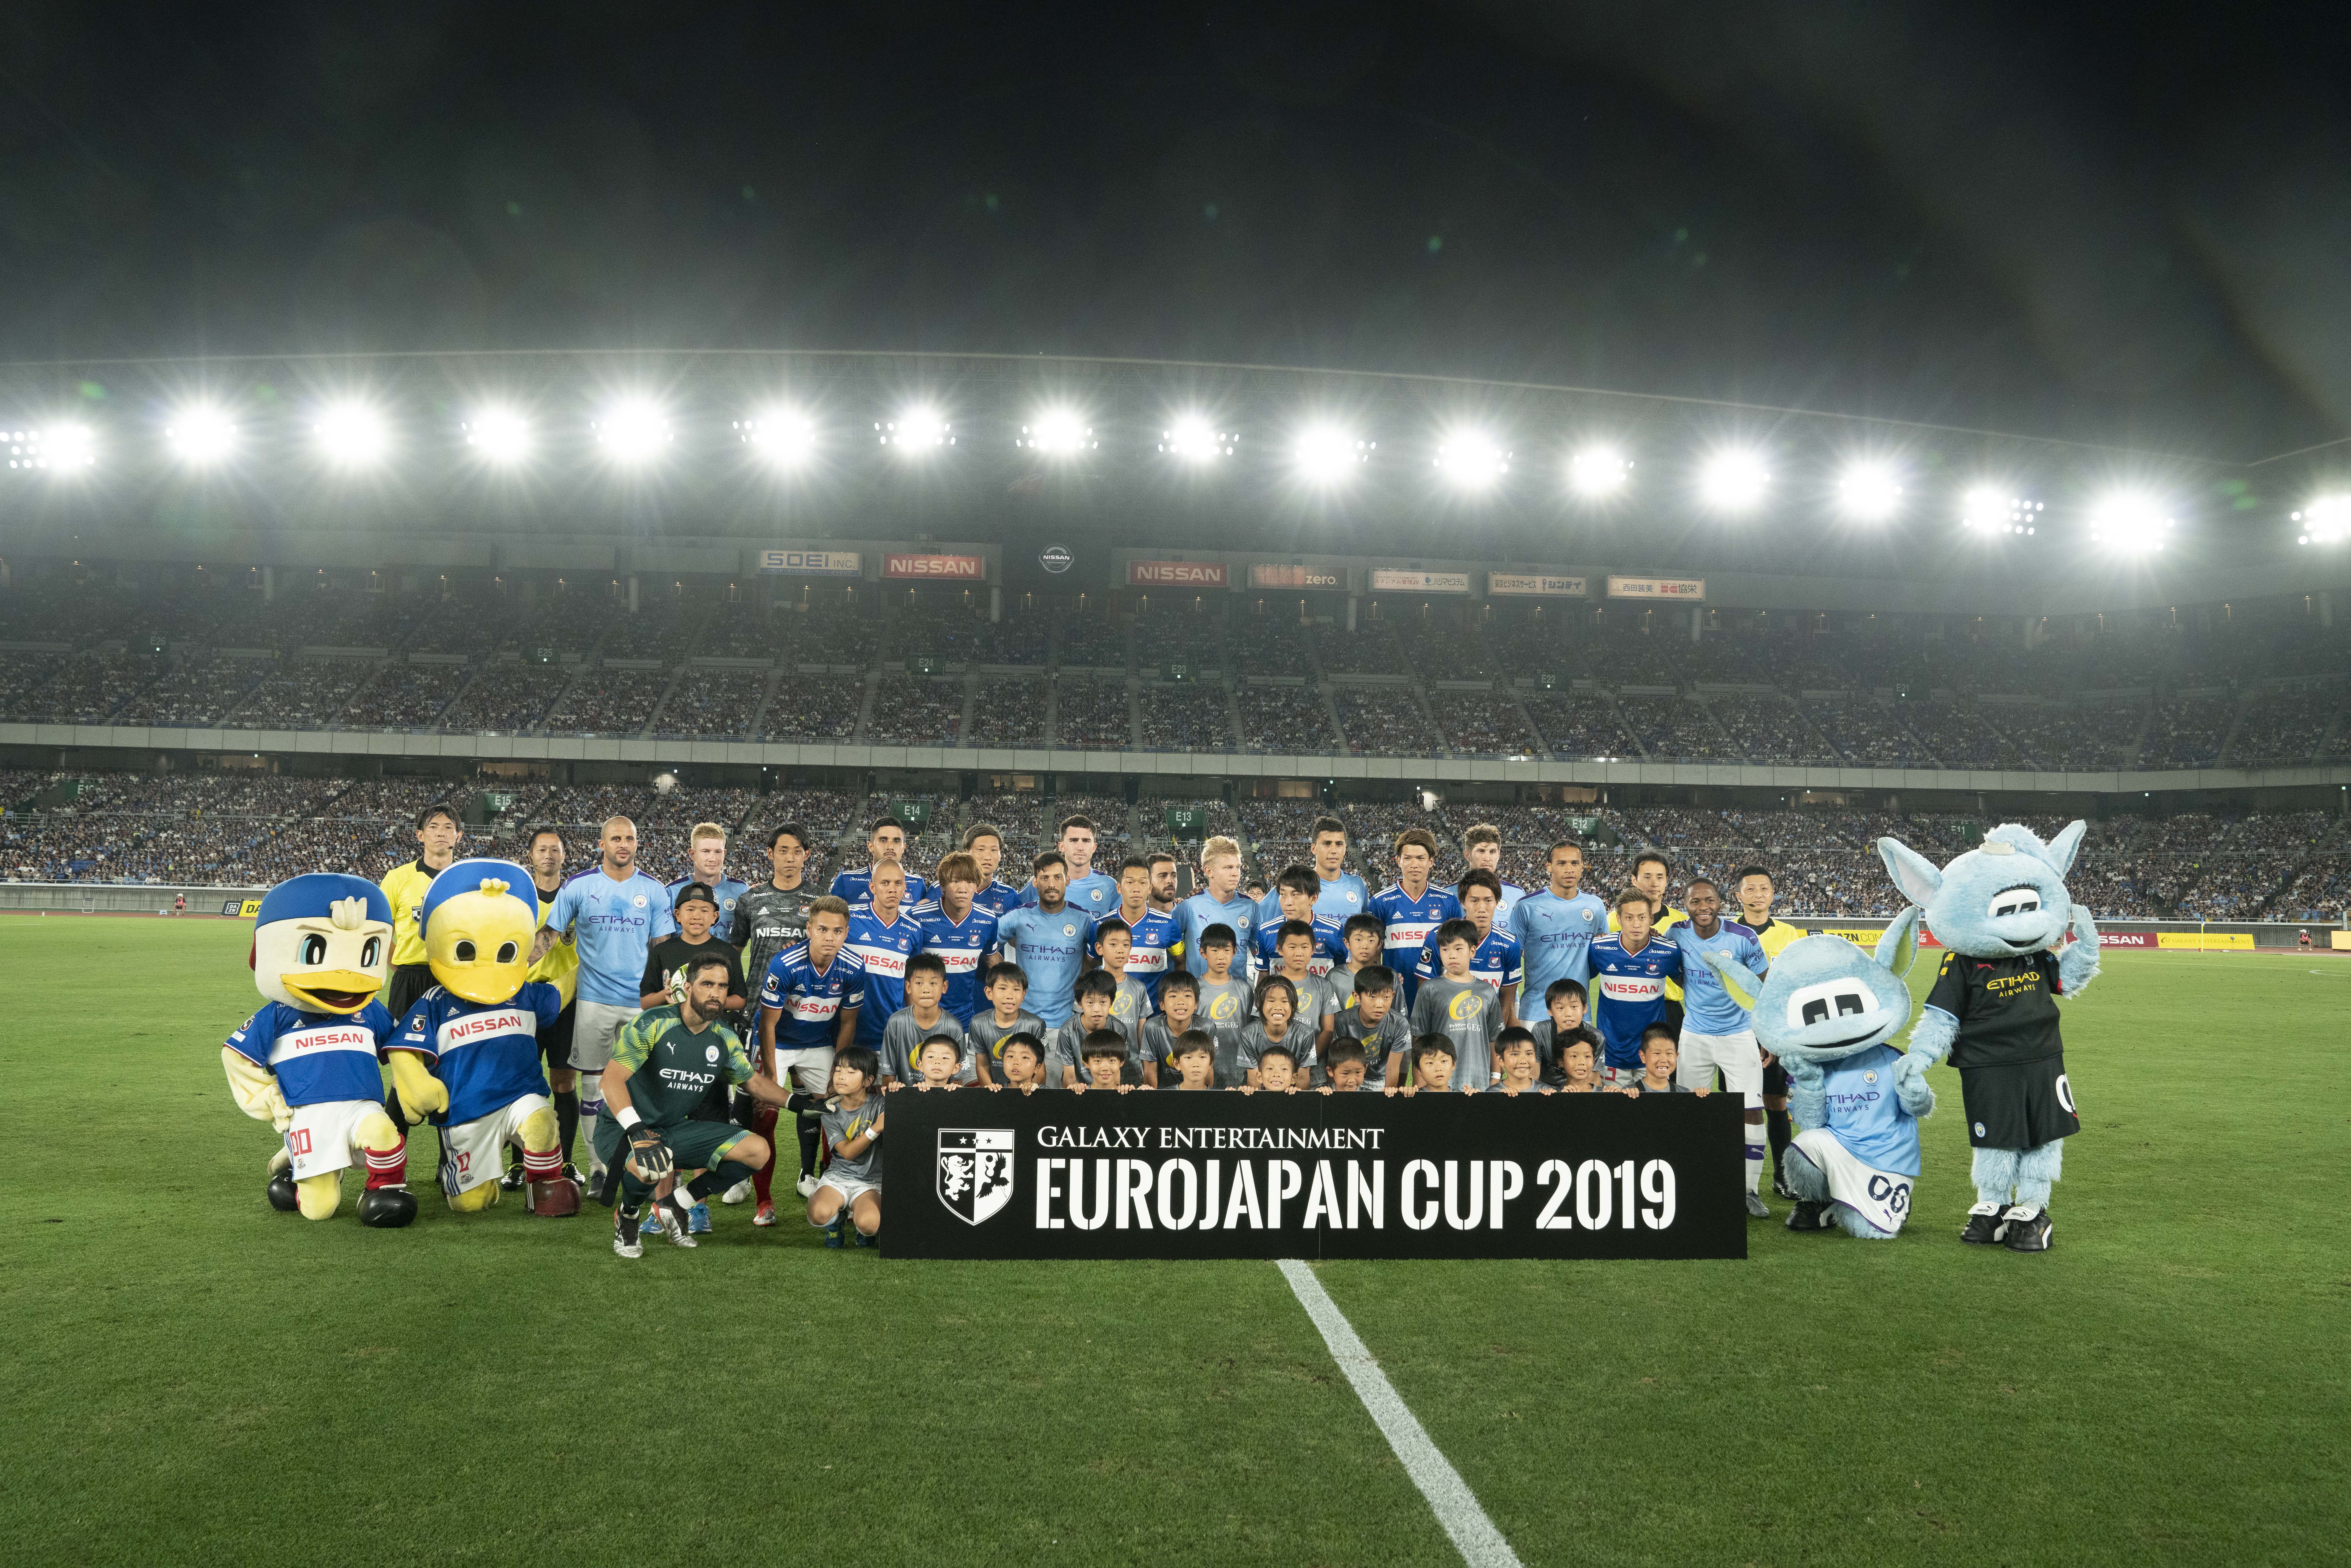 Galaxy Entertainment Group Strengthens Local Ties in Japan as Title Sponsor of GALAXY ENTERTAINMENT EUROJAPAN CUP 2019